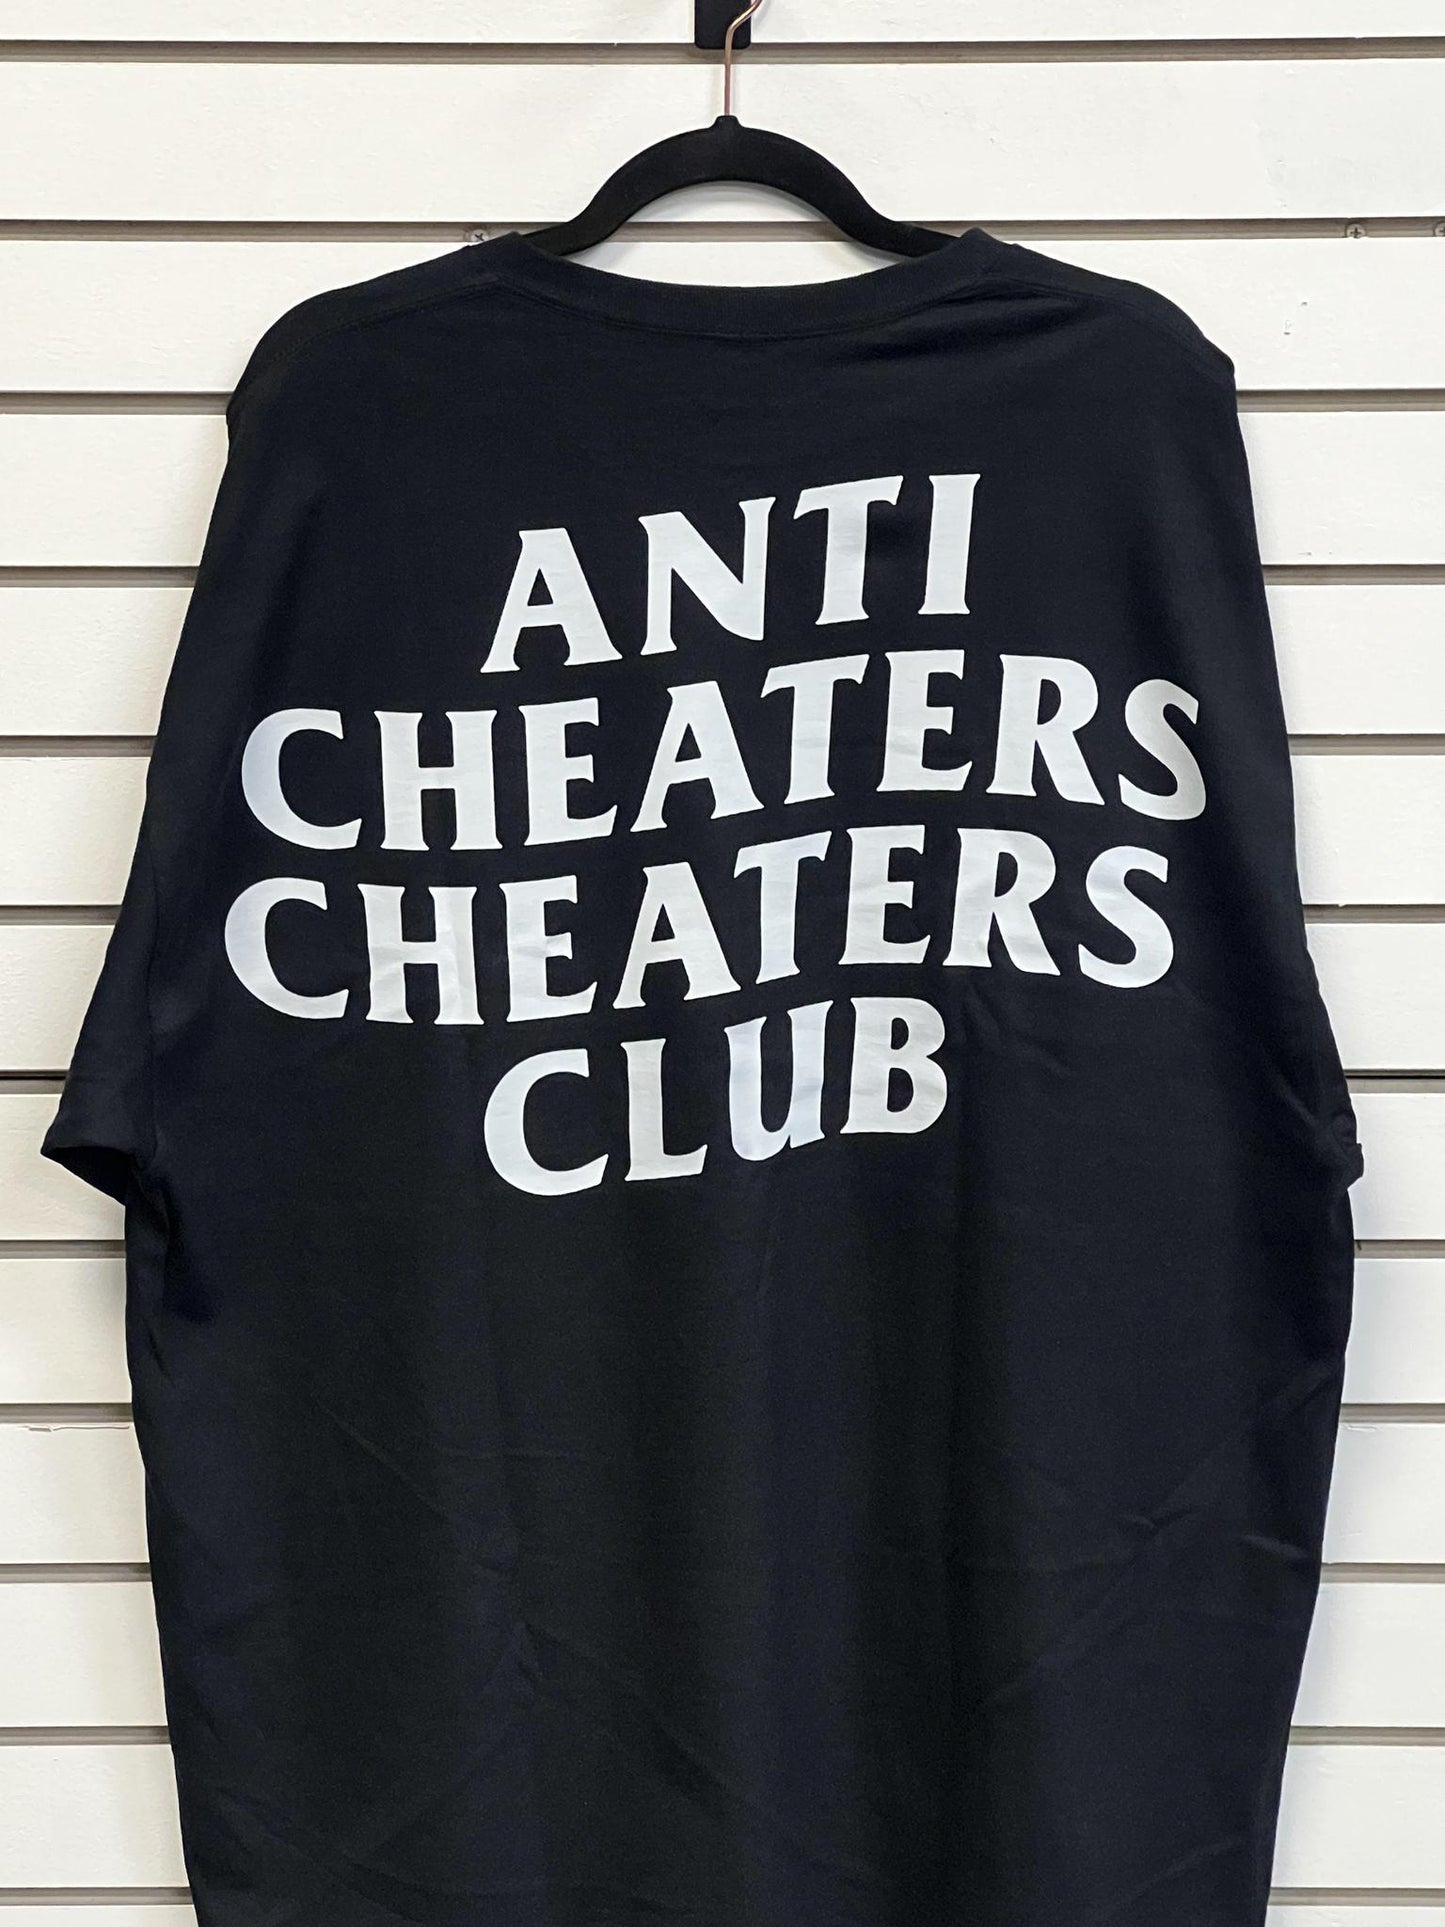 Full Auto Only Airsoft Exclusive - Anti Cheaters Cheaters Club